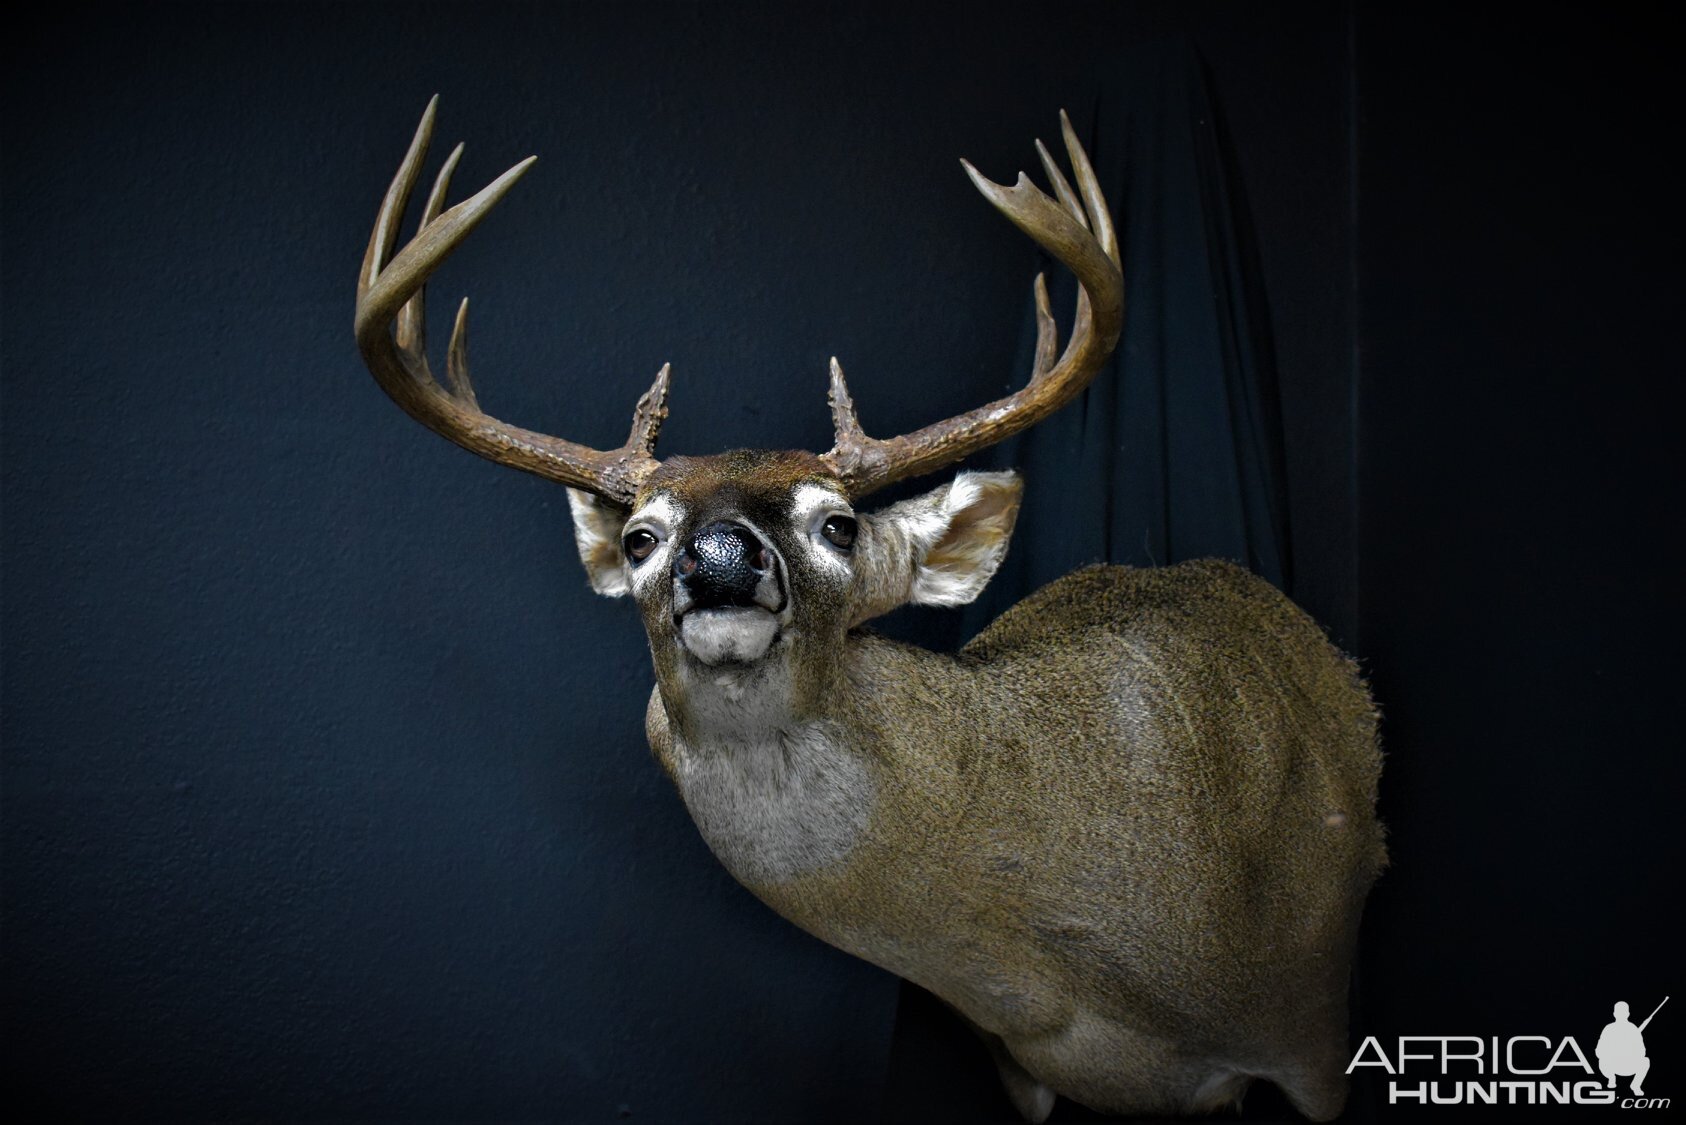 South Texas White-tailed Deer Shoulder Mount Taxidermy